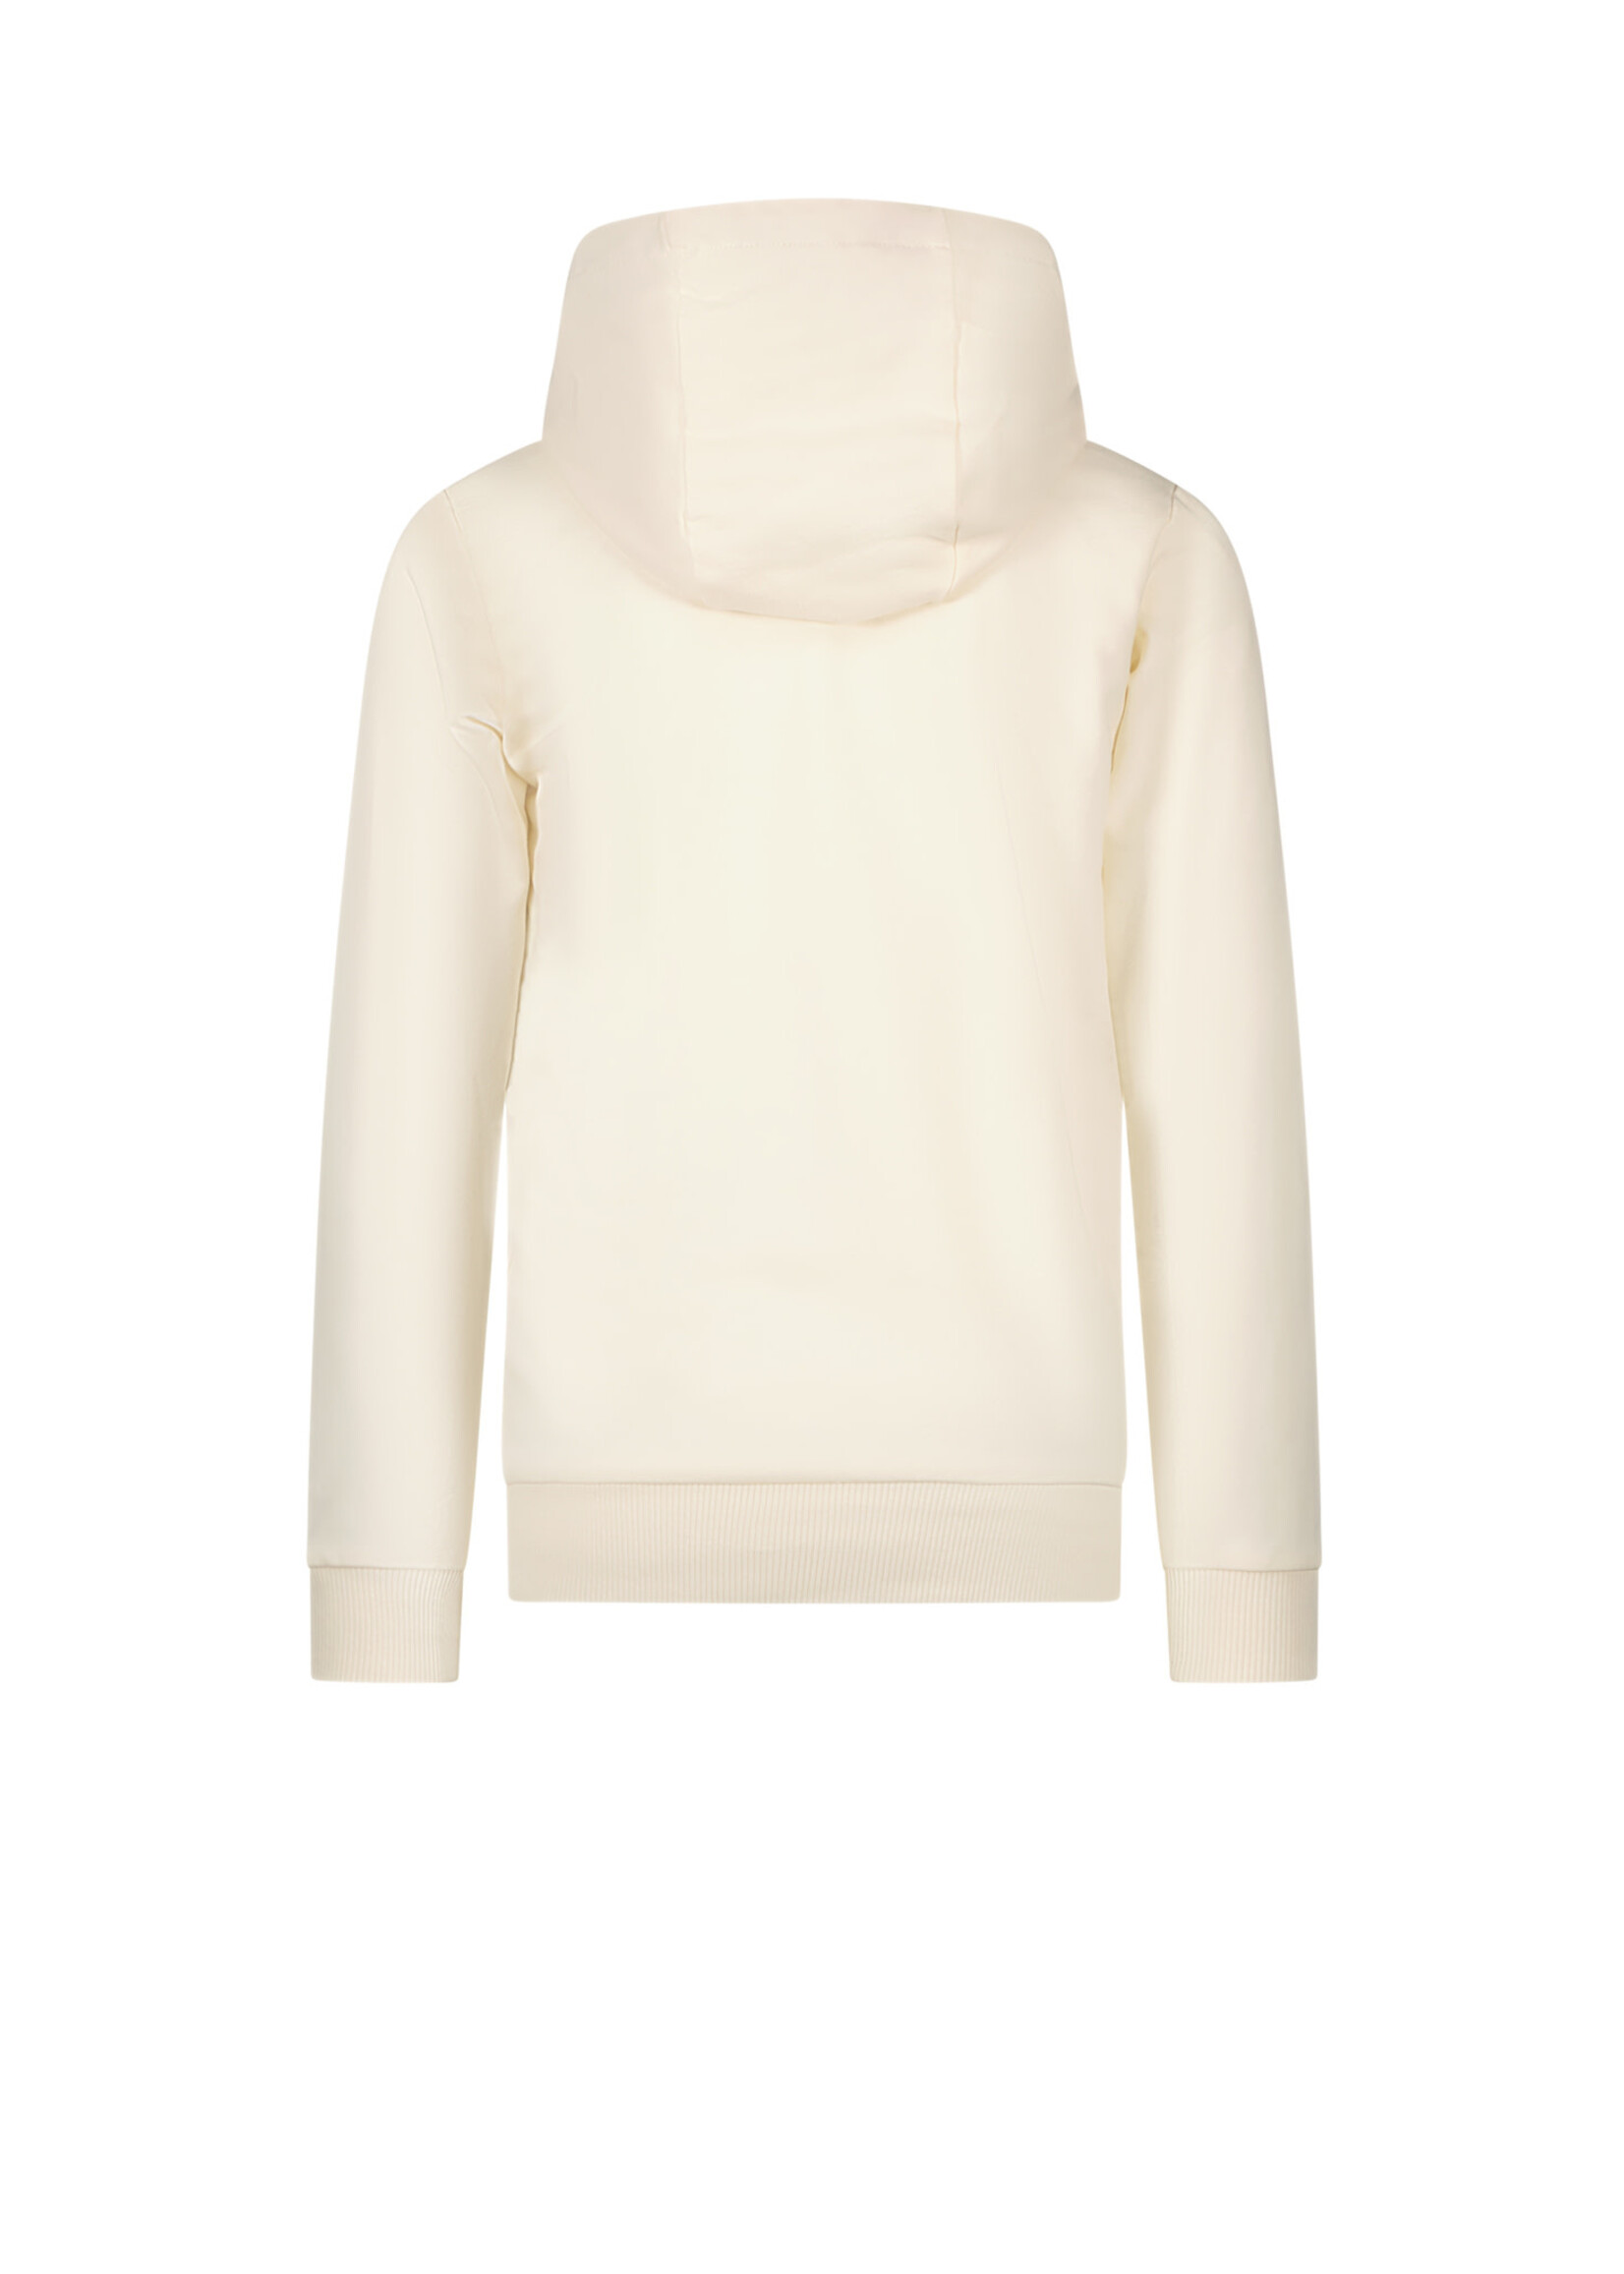 Le Chic Le Chic hoodie off white